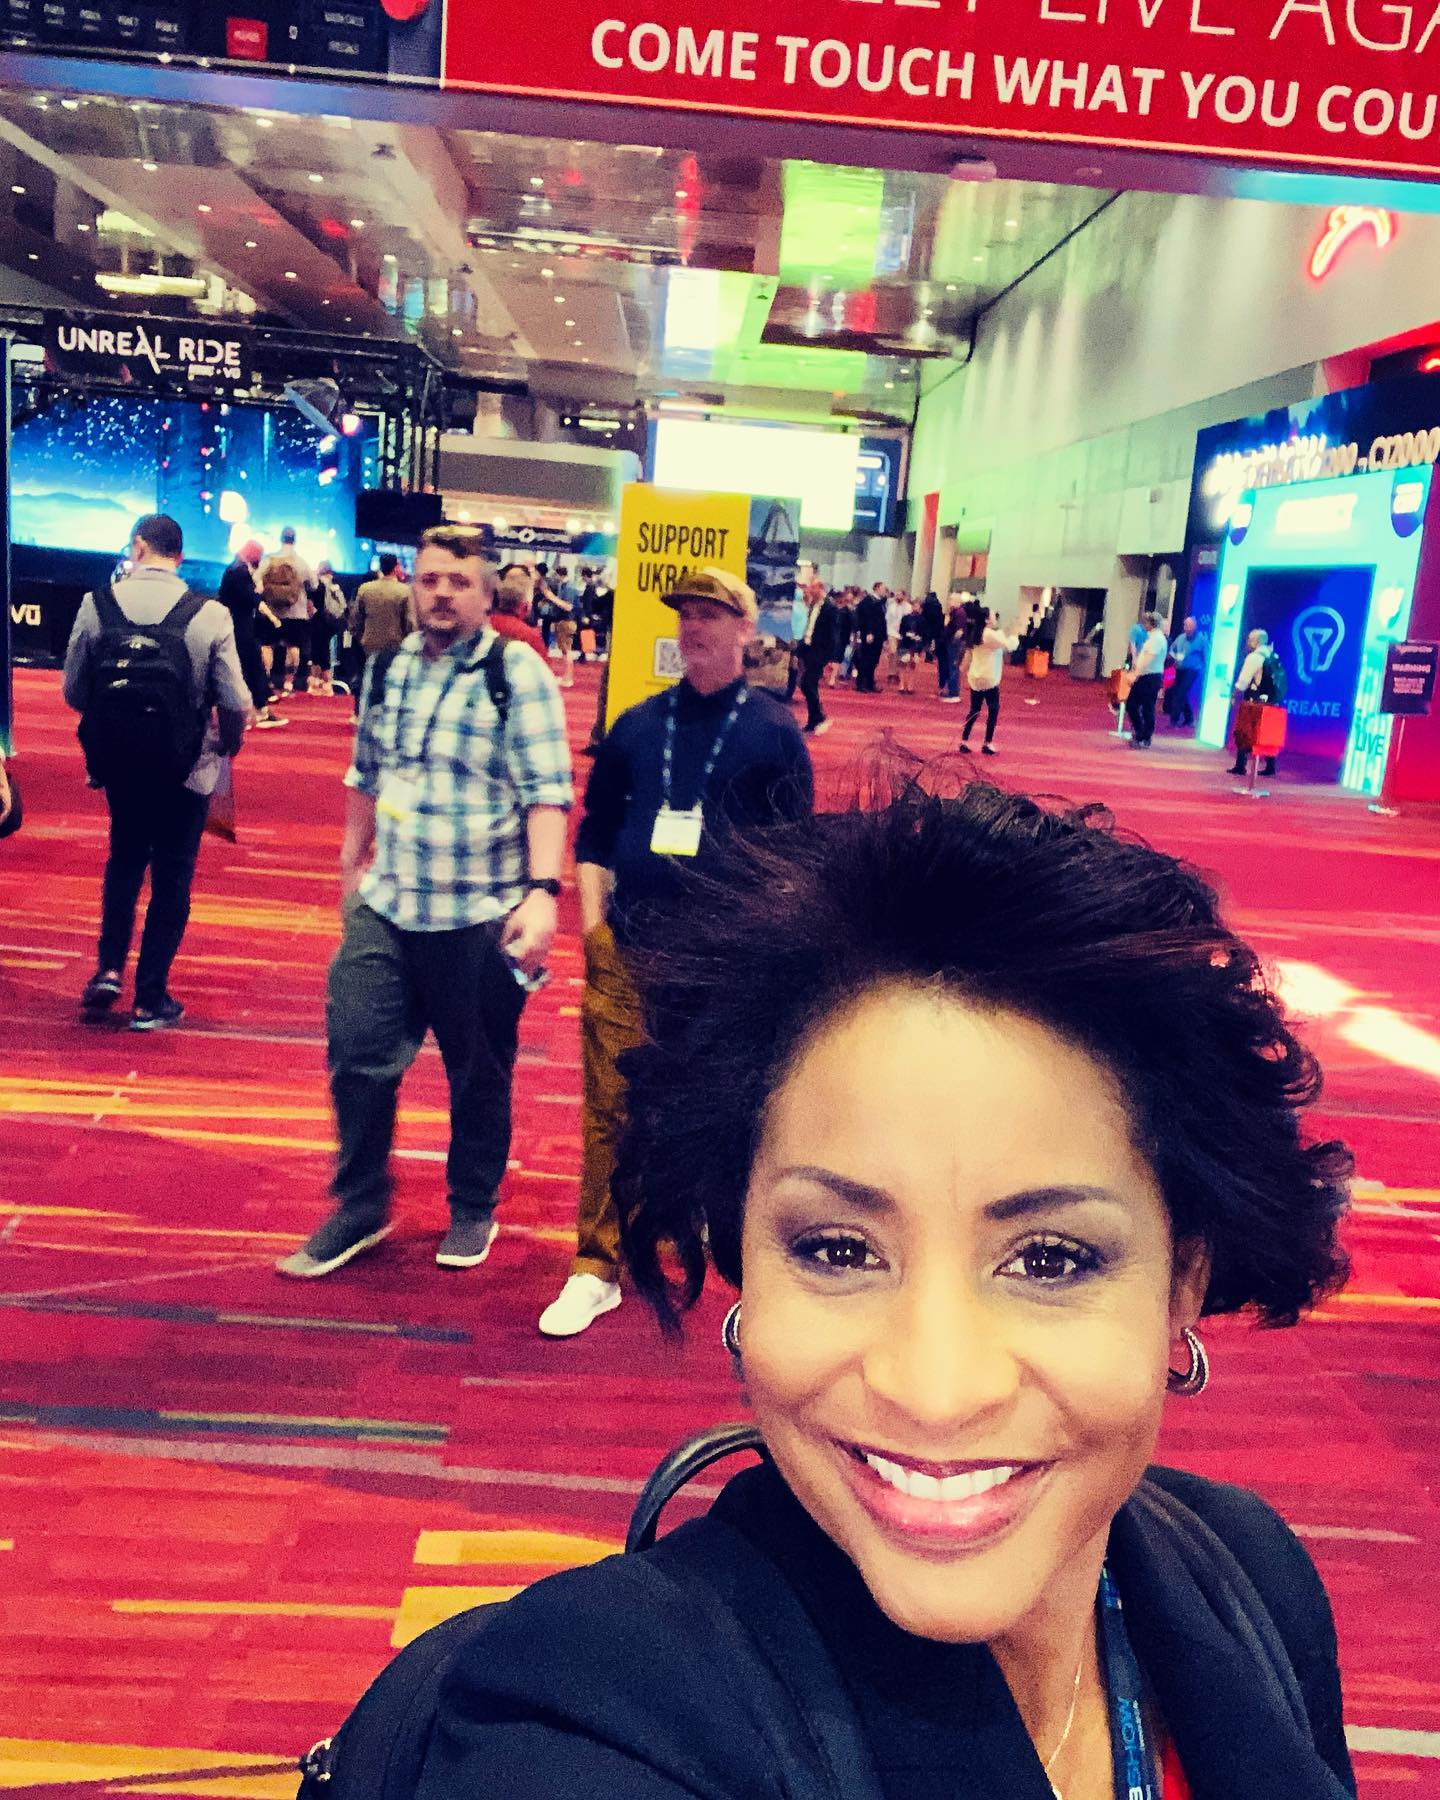 @nabshow 2022

So this was a first for me. Fun and work travels have taken me over the globe to all kinds of events but this is my first time attending the National Association of Broadcasters convention here in @vegas.

Lots of new trends, tech, tools and cool virtual stuff to check out.

Why this event? Honored to represent #Magid to moderate a panel for the Diversity Symposium  talking #DEI- and what it means for the broadcast industry for hiring, training, retention and more…
 
The discussion falls right in line with the insights learned with my ASA Rise Fellowship also focusing on #diversity #equity #inclusion in the field of aging - so many intersections.

Progress- but always more work to be done.

#education #awareness #inclusion